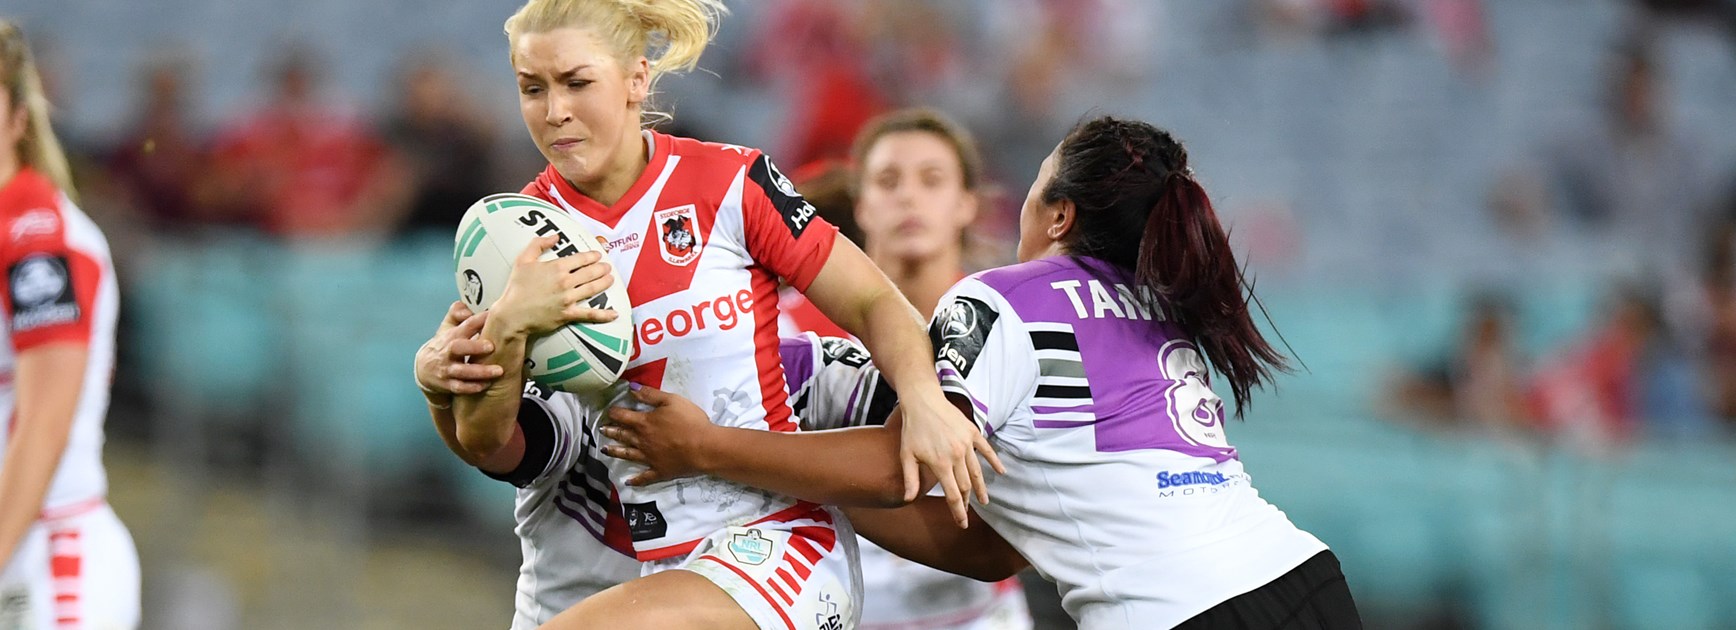 NRLW 24-hour warning: Round 3 v Roosters